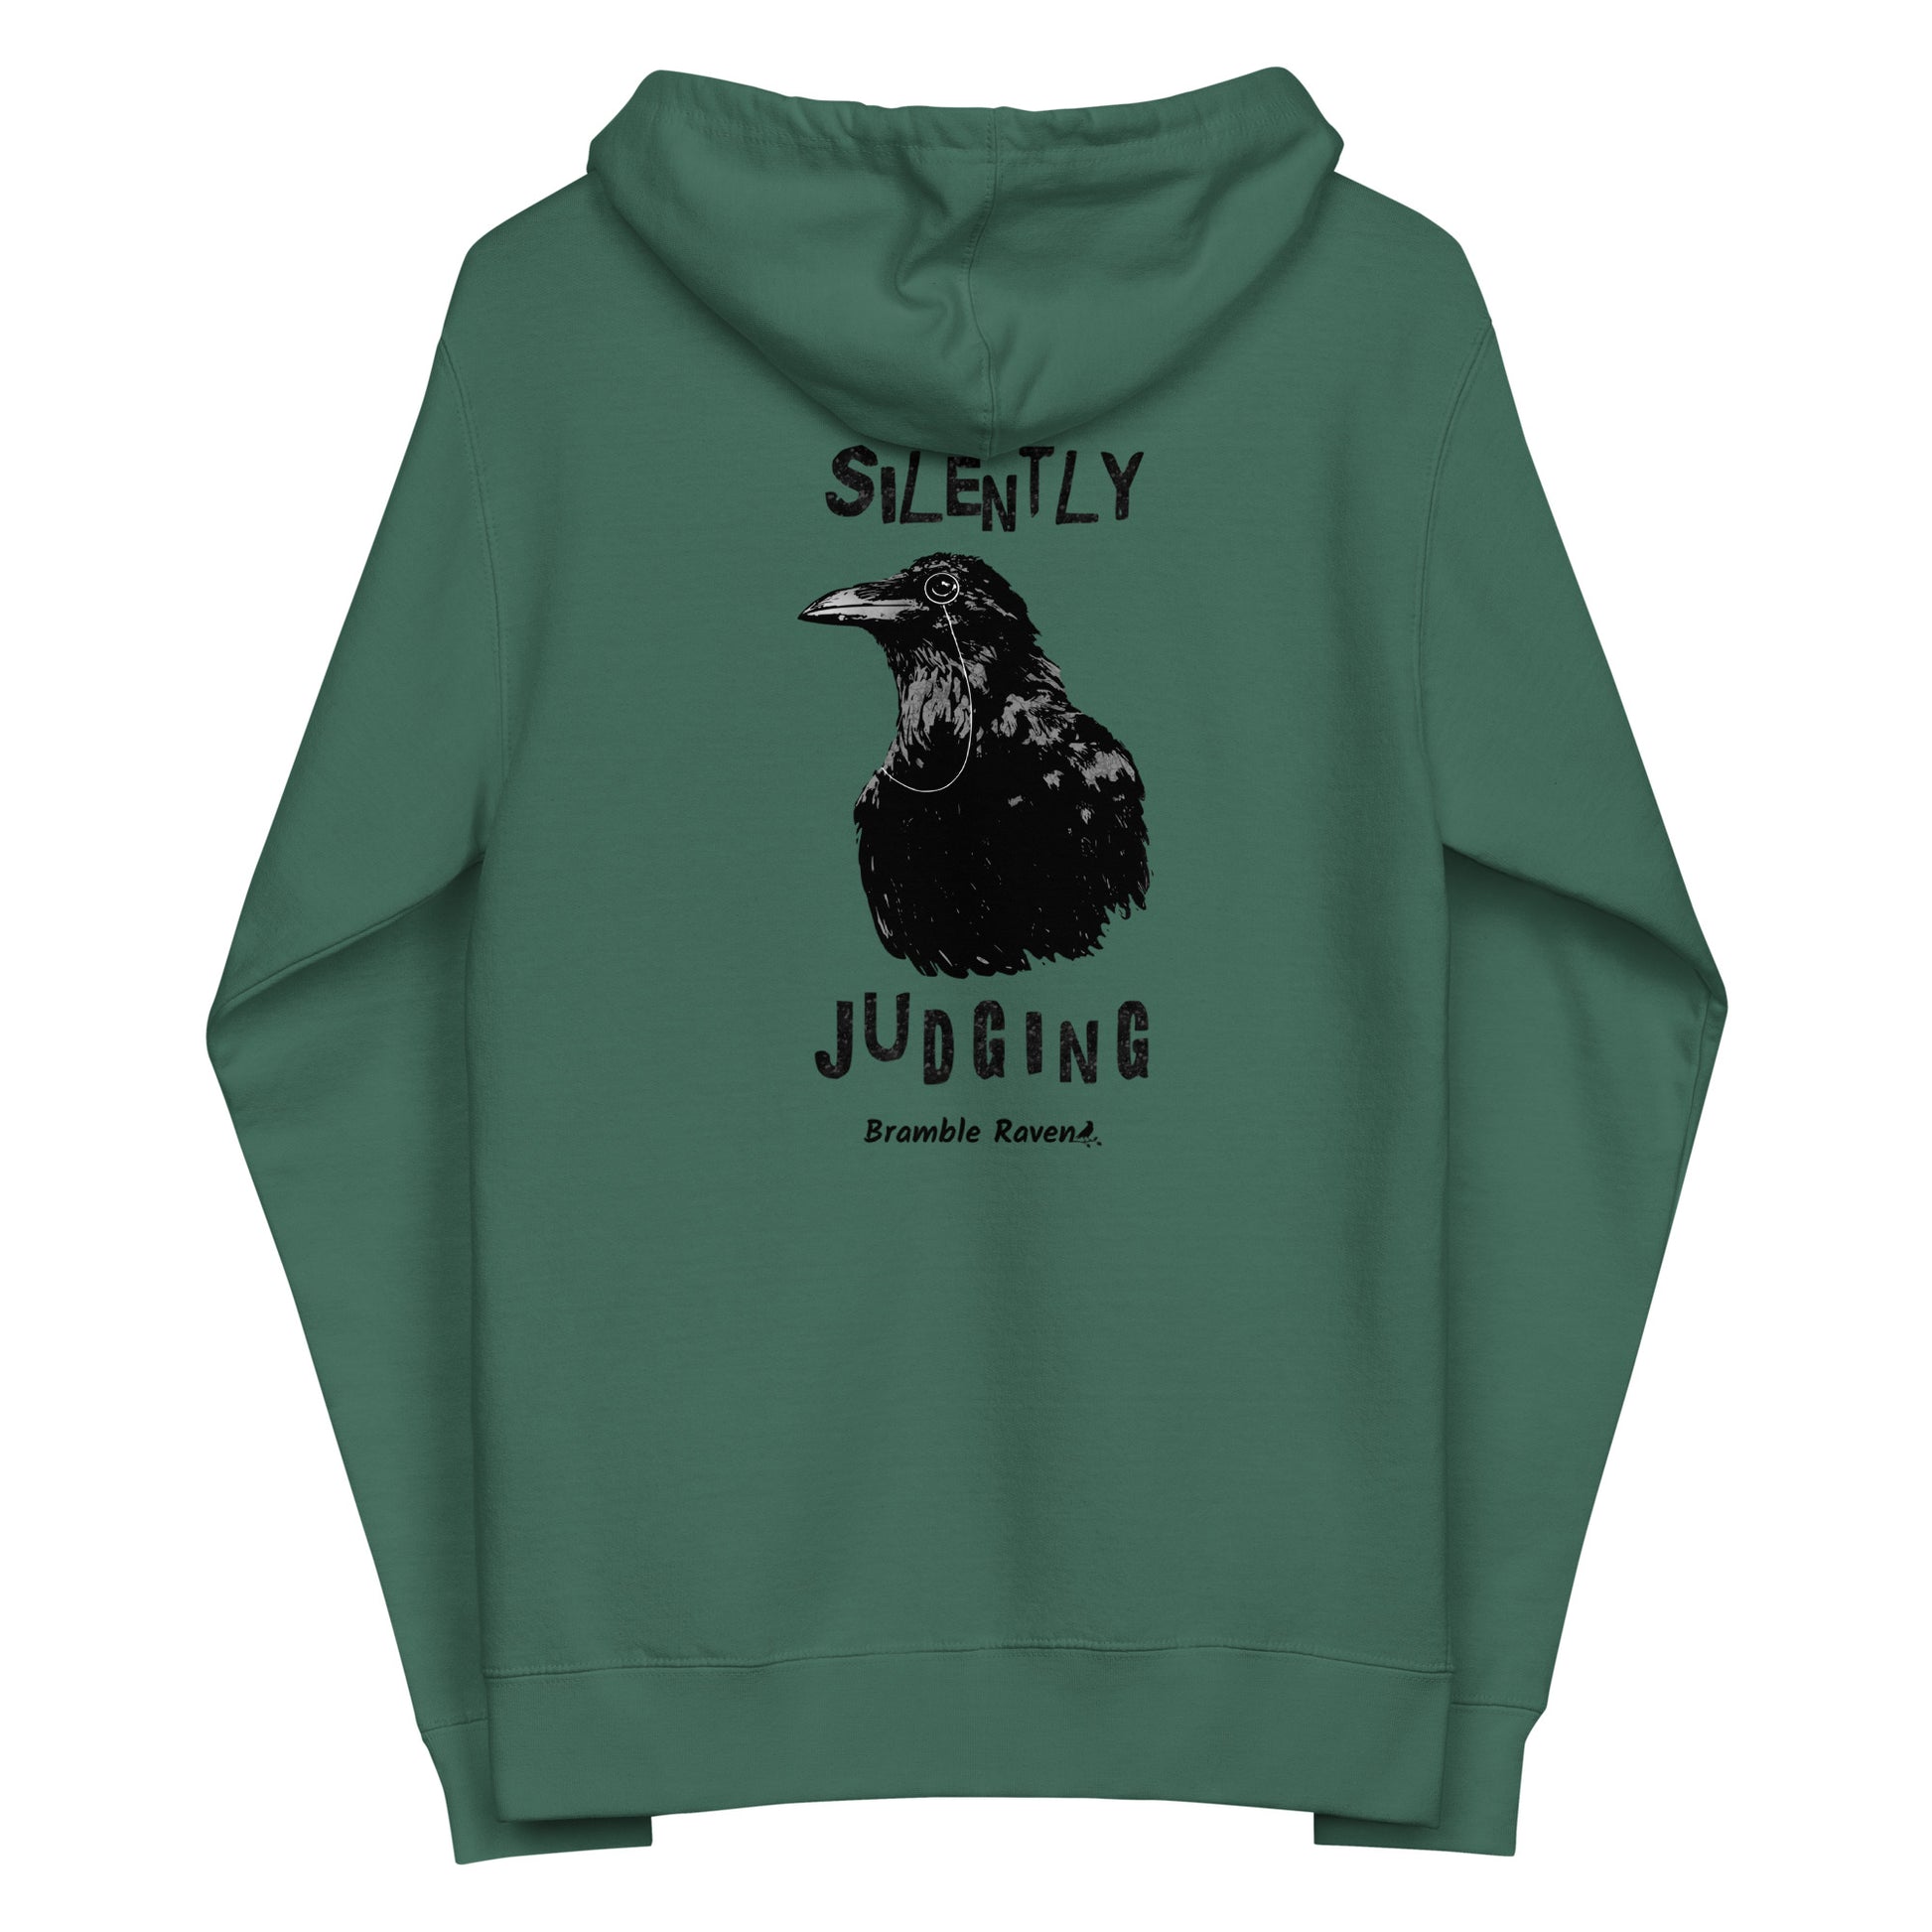 Alpine green unisex fleece zip up hoodie. Features Silently Judging text in bold vertical design around image of a crow wearing a monocle. Design is on back of hoodie.